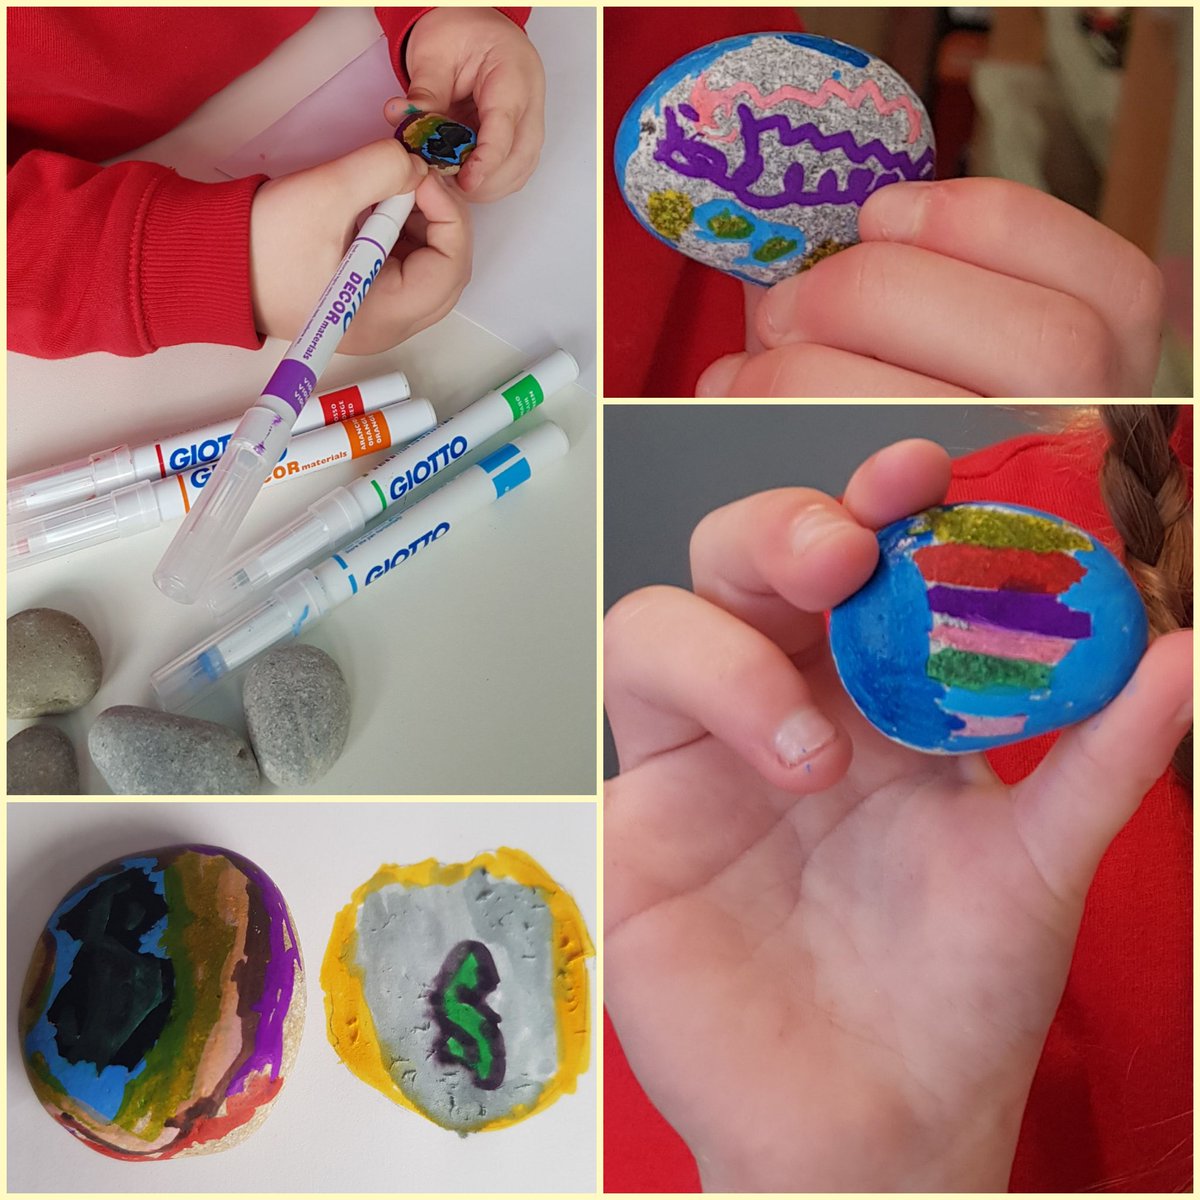 Choosing a stone that matches the energy in that moment....these were excited & calm pebbles. The children had fun designing how this looks for them 🌈

#mood #mindfulness #awarenessofself #creativity